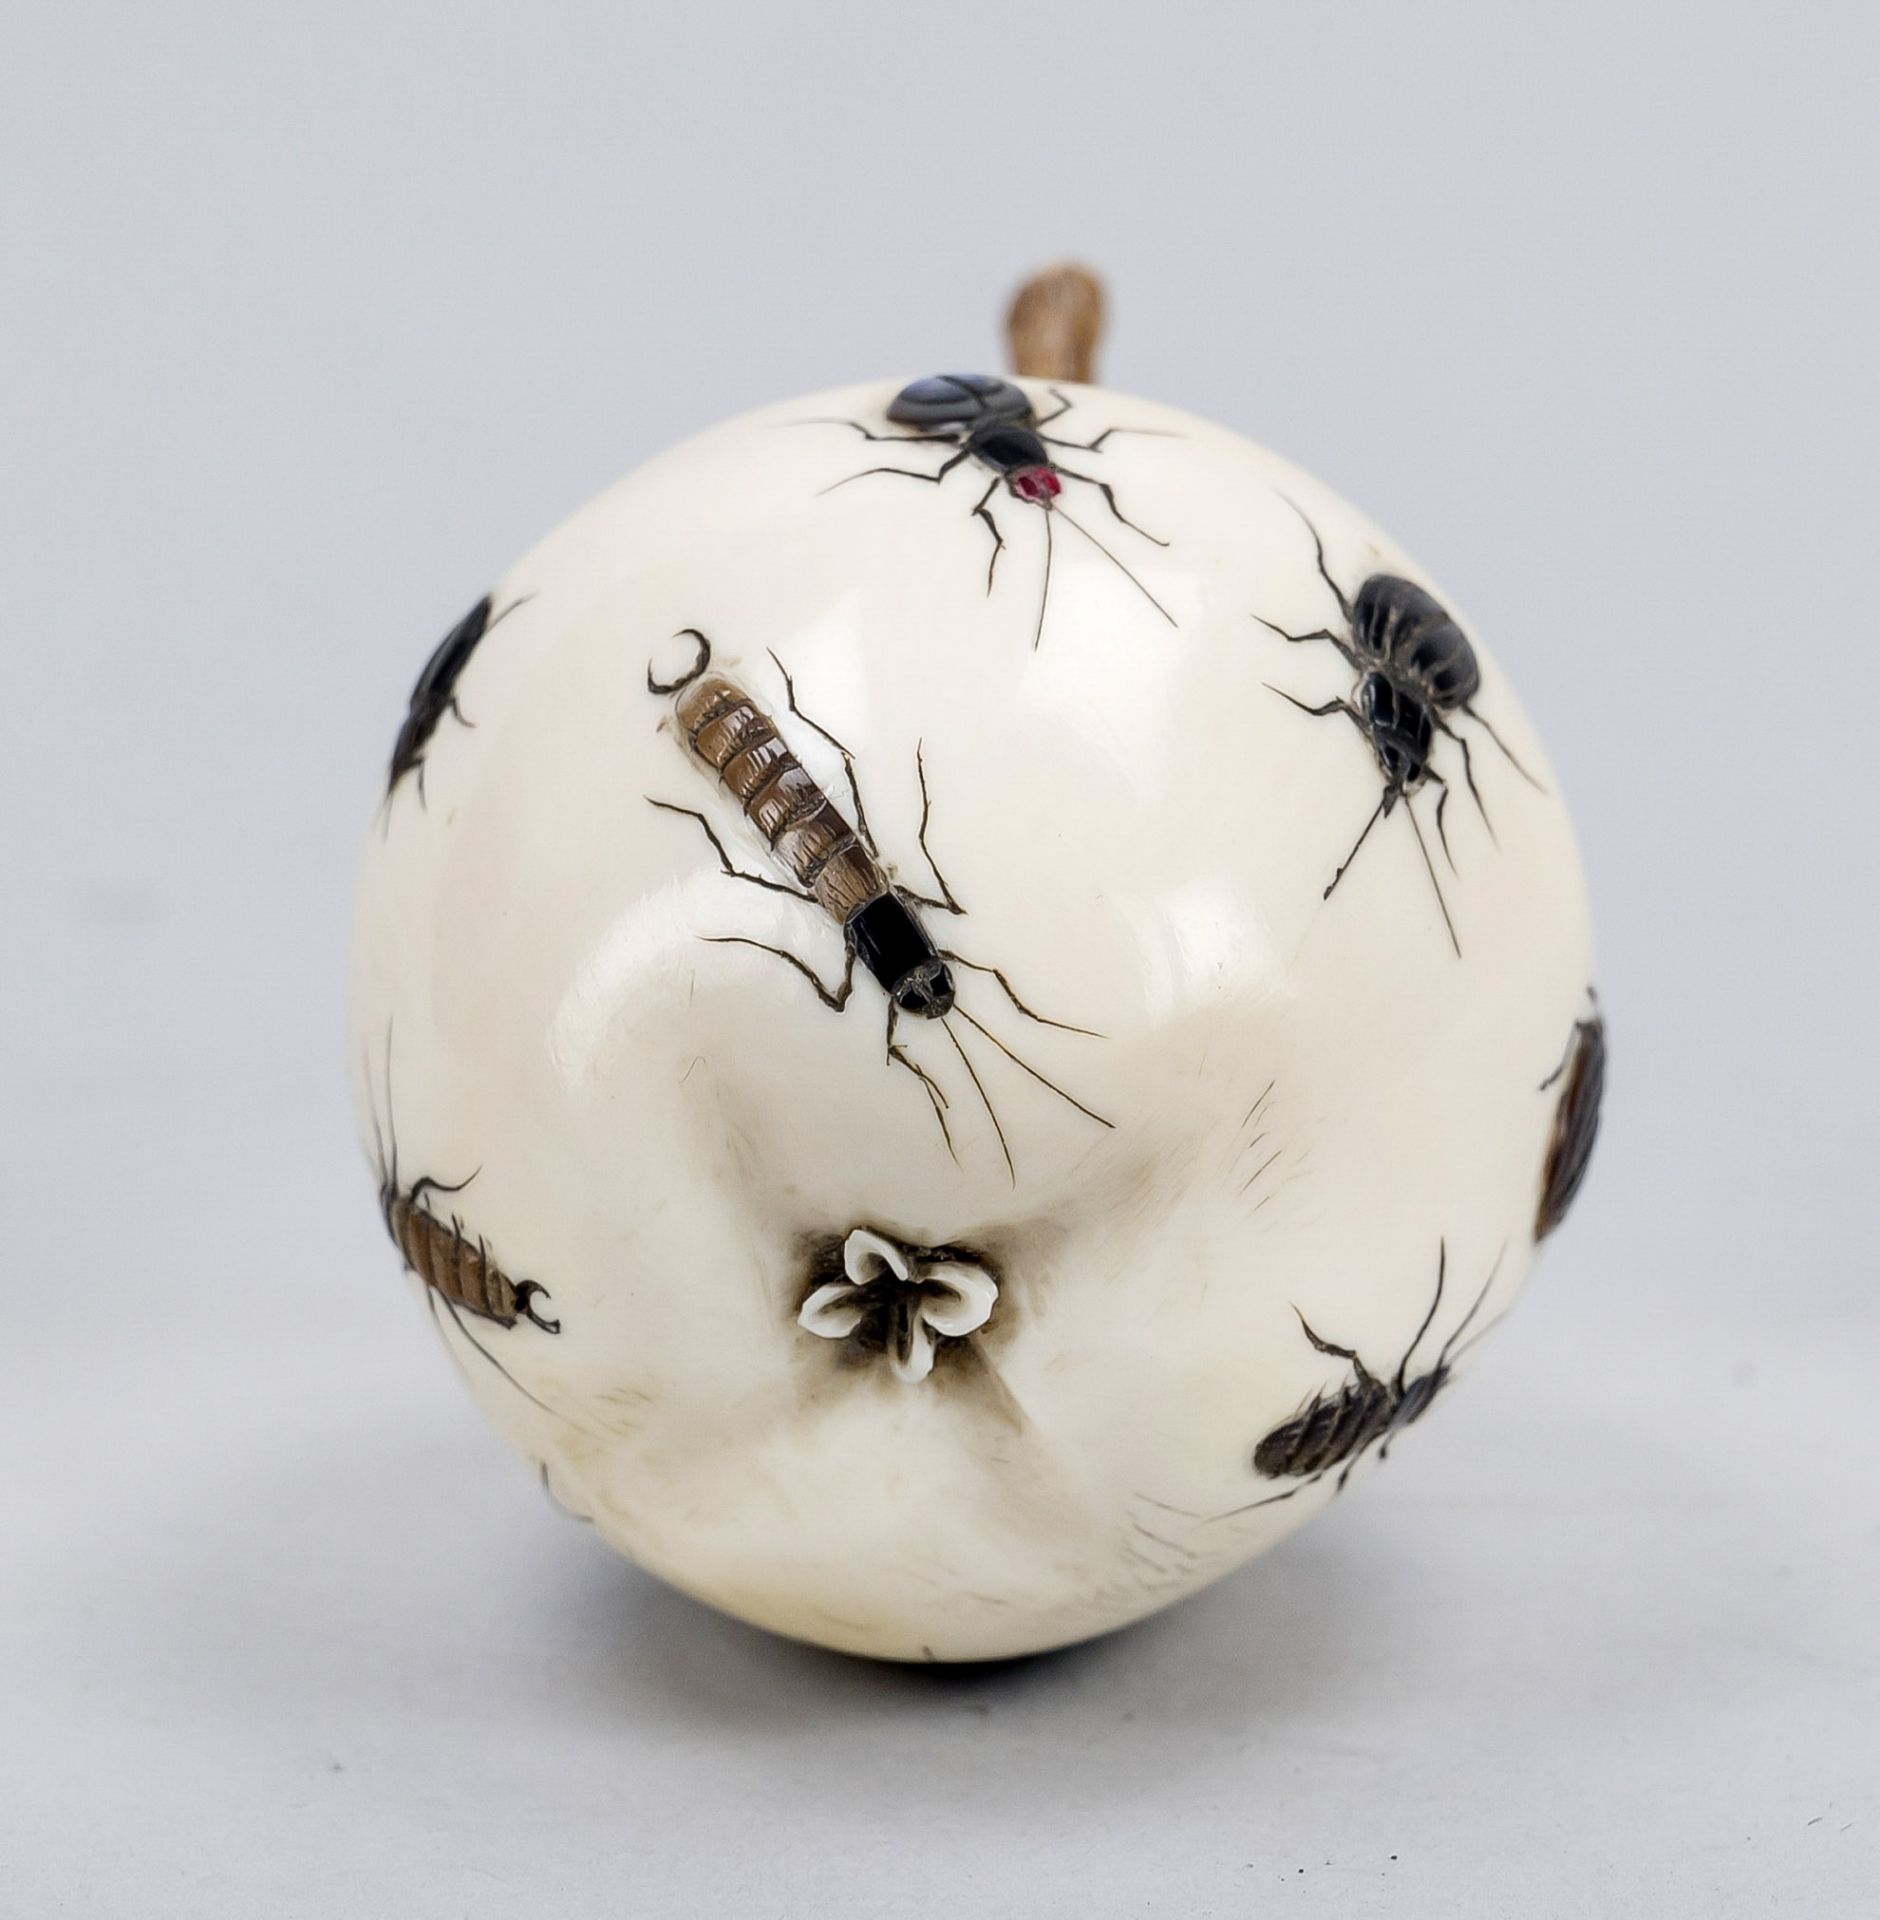 Shibayama Okimono as an apple, Japan c. 1900 (Meiji), ivory with mother-of-pearl and stone inlays. - Image 3 of 4